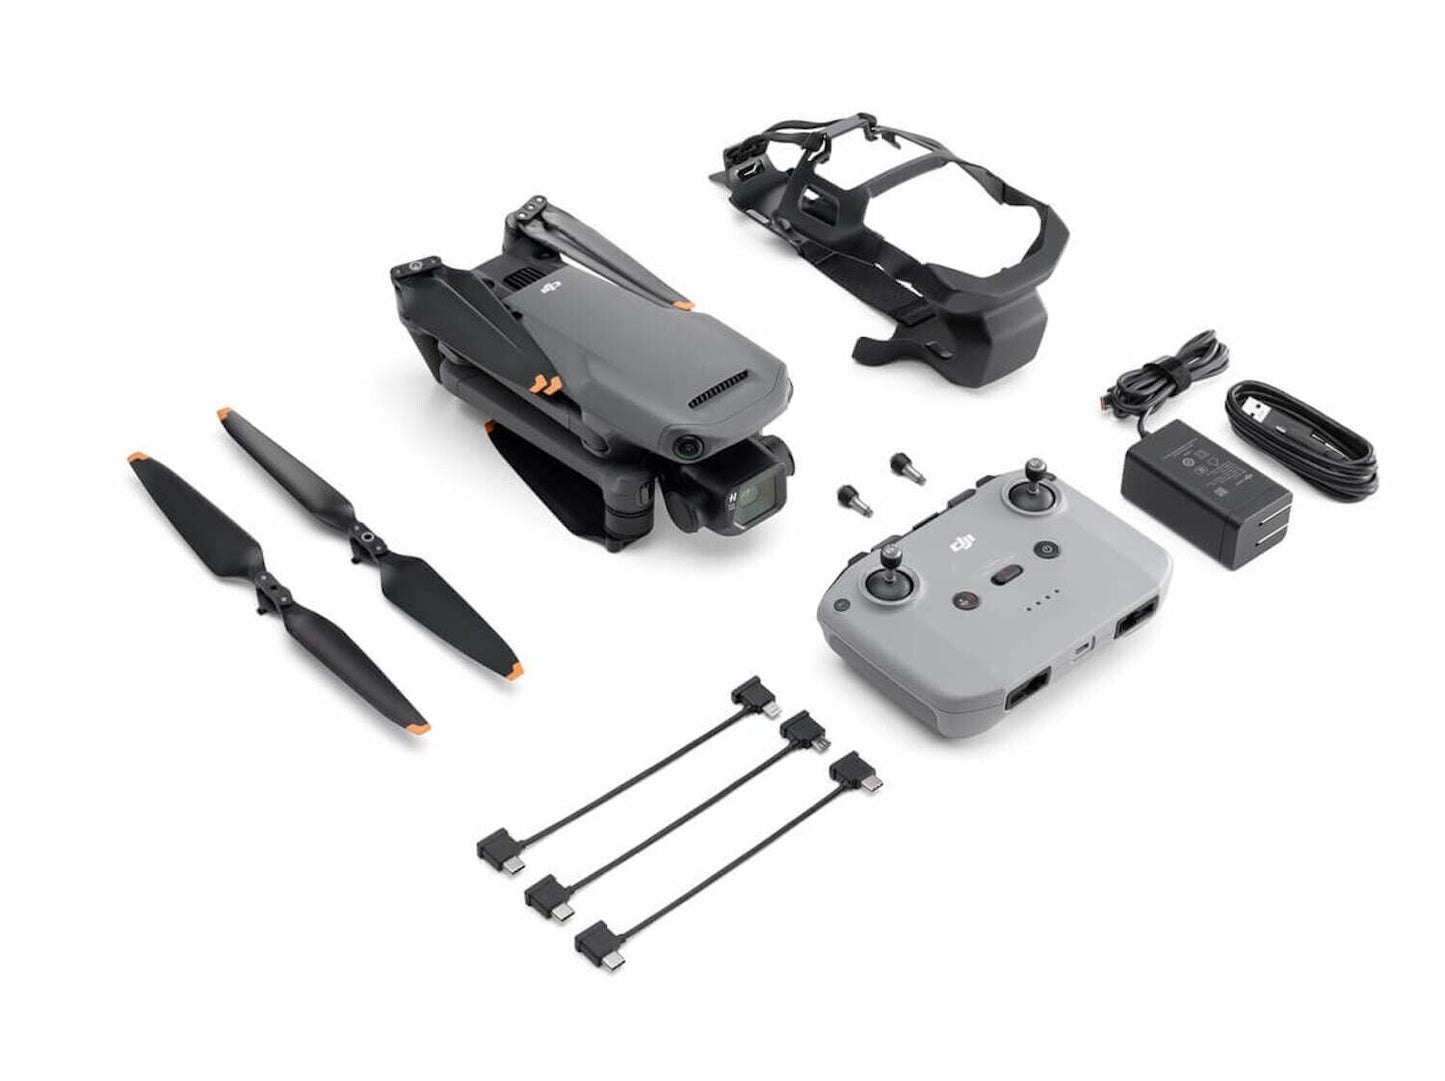 DJI Mini 2 Drone Quadcopter Ready To Fly 3 battery Bundle -Certified Refurbished